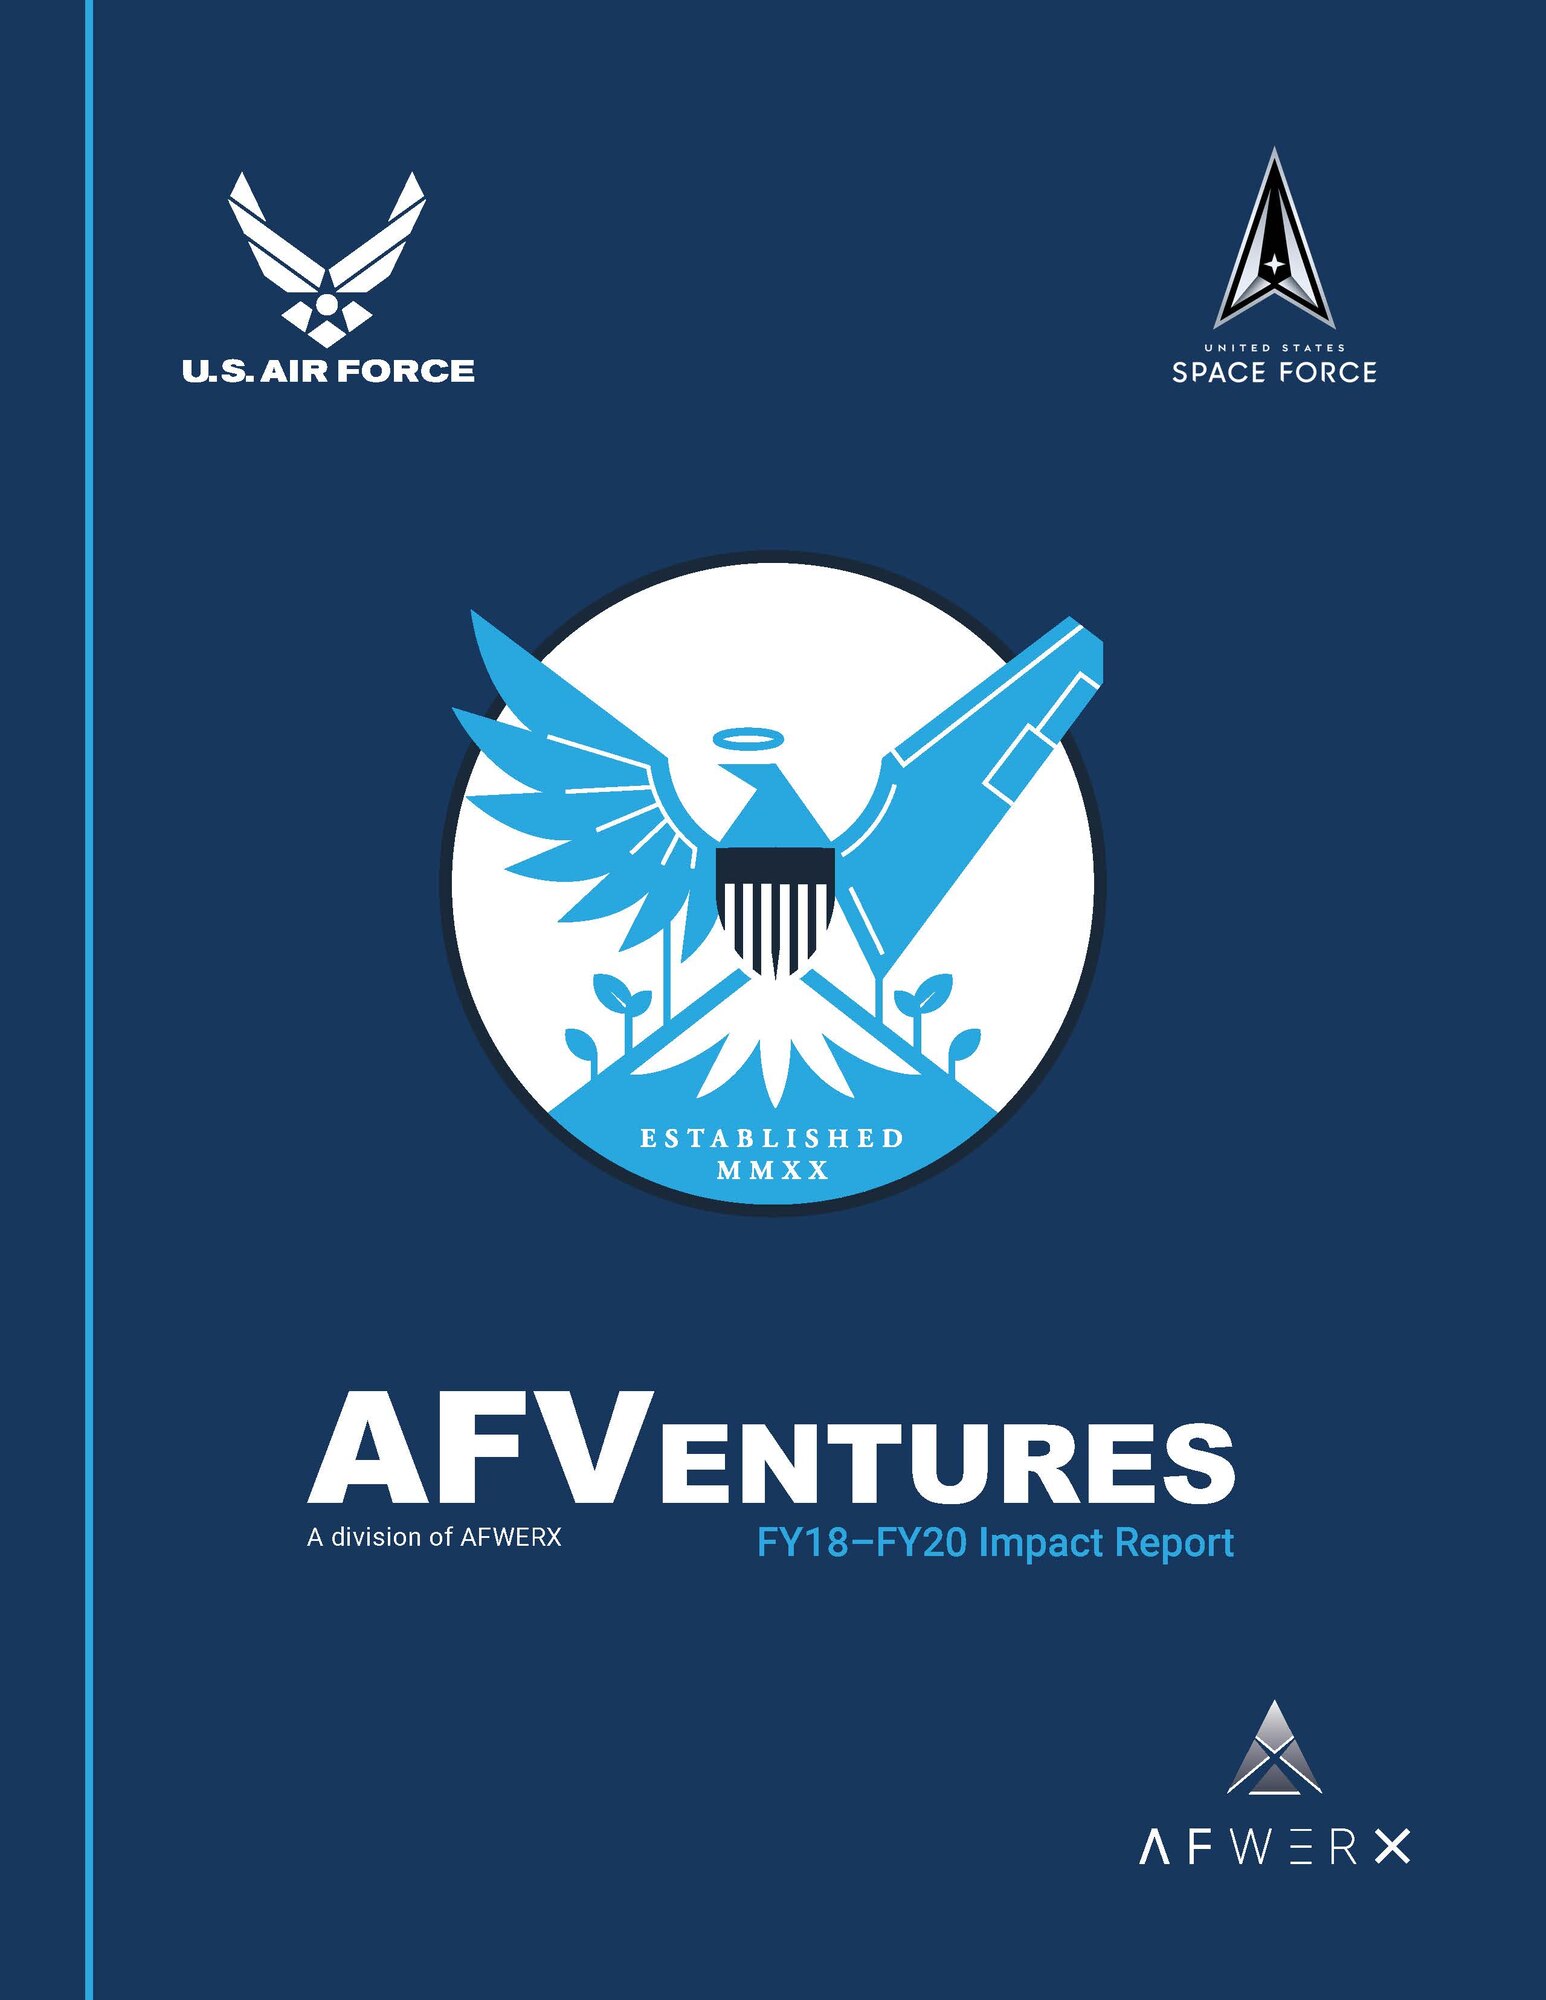 AFVentures, the Department of the Air Force’s commercial investment group, has released its fiscal year 2020 annual report. The report details AFVentures’ successes in fulfilling its mission of expanding and maintaining the Air Force’s innovative capabilities by matching operator needs with private-sector solutions.